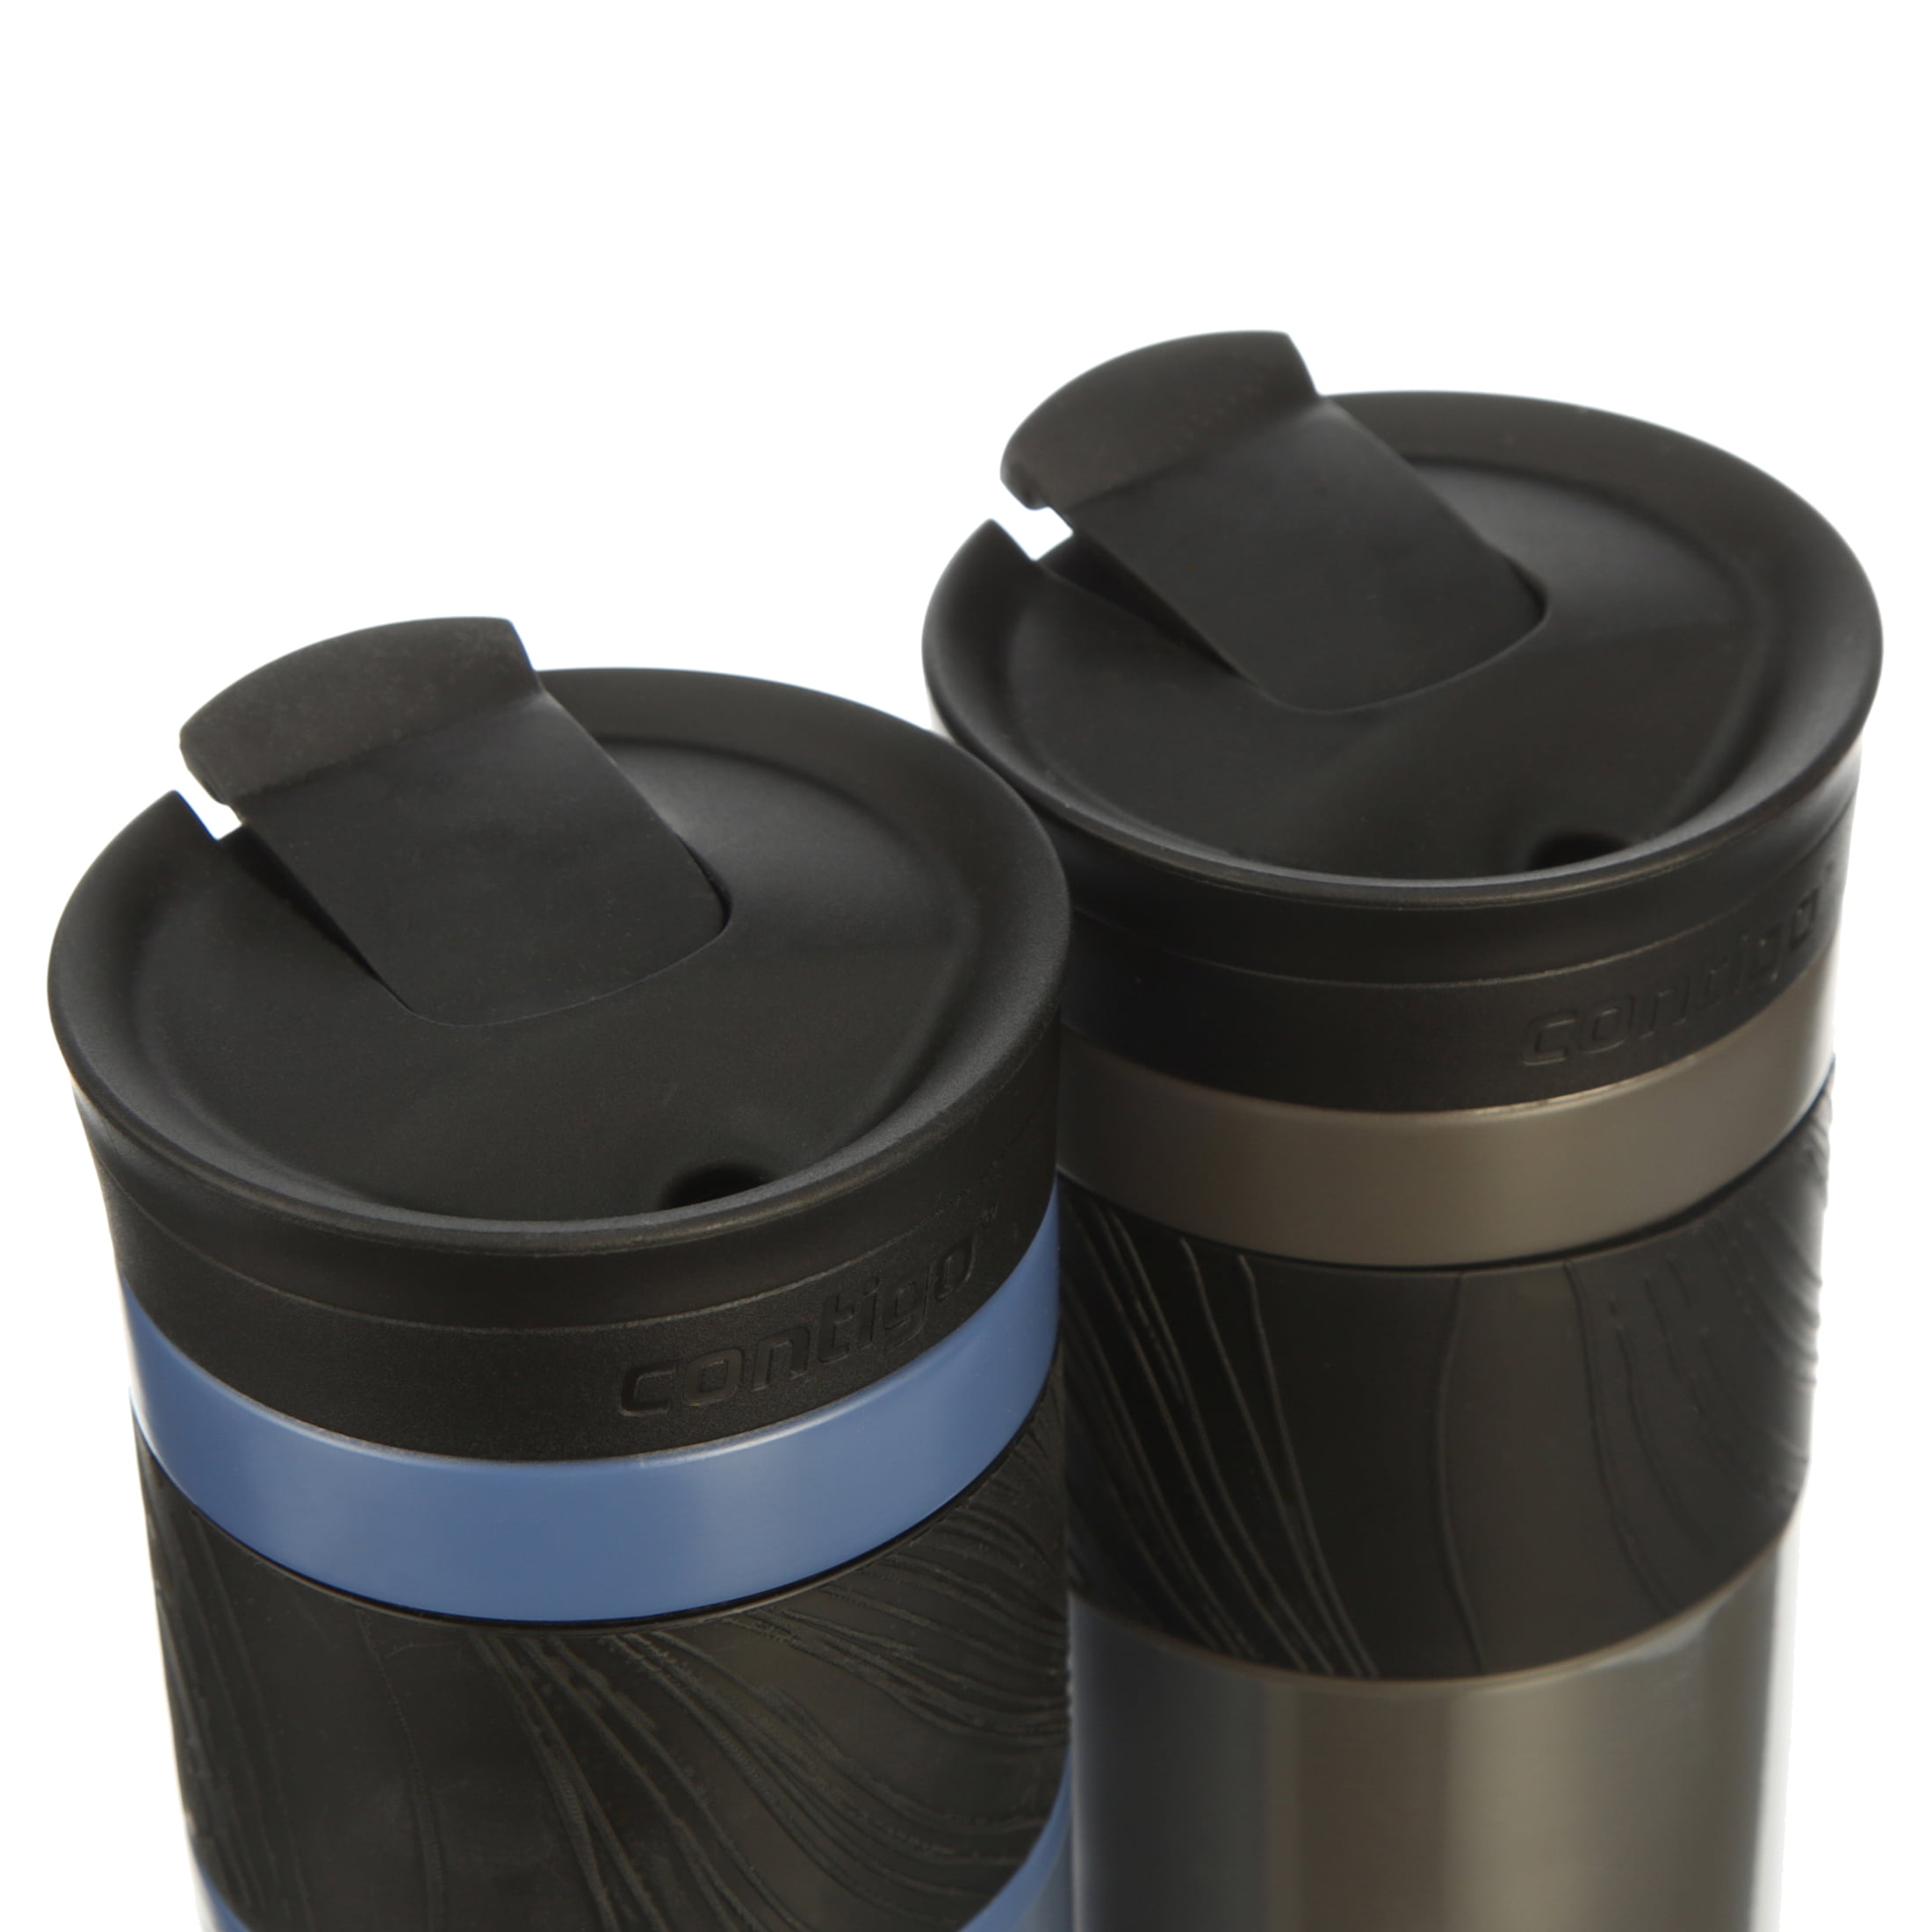 Byron 2.0 Stainless Steel Travel Mug with SNAPSEAL™ Lid, 16 oz, 2-Pack